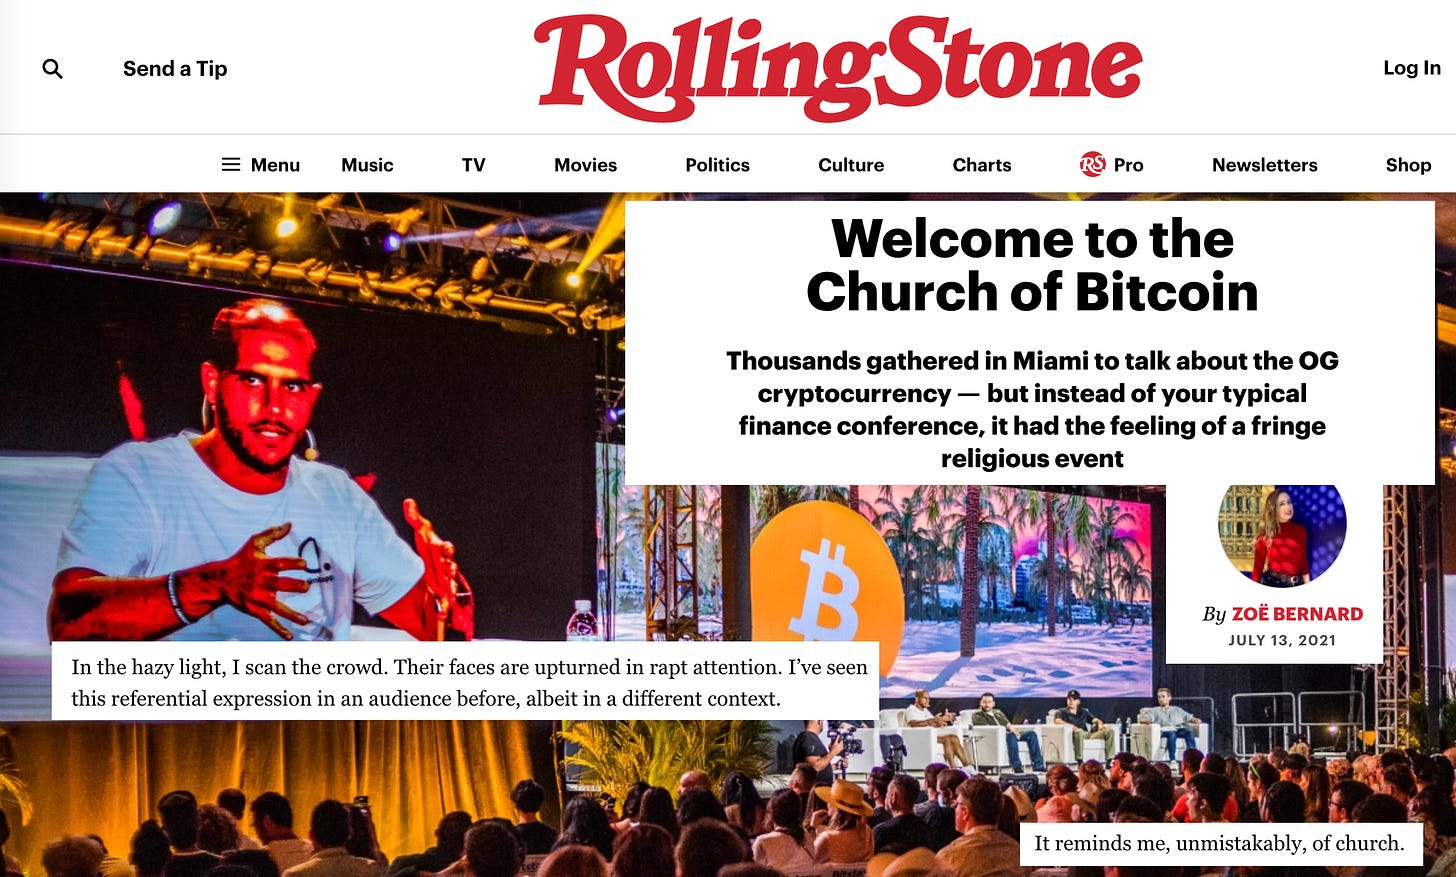 Collage from Zoë Bernard’s Rolling Stone feature “Welcome to the Church of Bitcoin” including a picture of the crowd looking at a huge screen and stage, and the lines: “In the hazy light, I scan the crowd. Their faces are upturned in rapt attention. I’ve seen this referential expression in an audience before, albeit in a different context. It reminds me, unmistakably, of church.” 